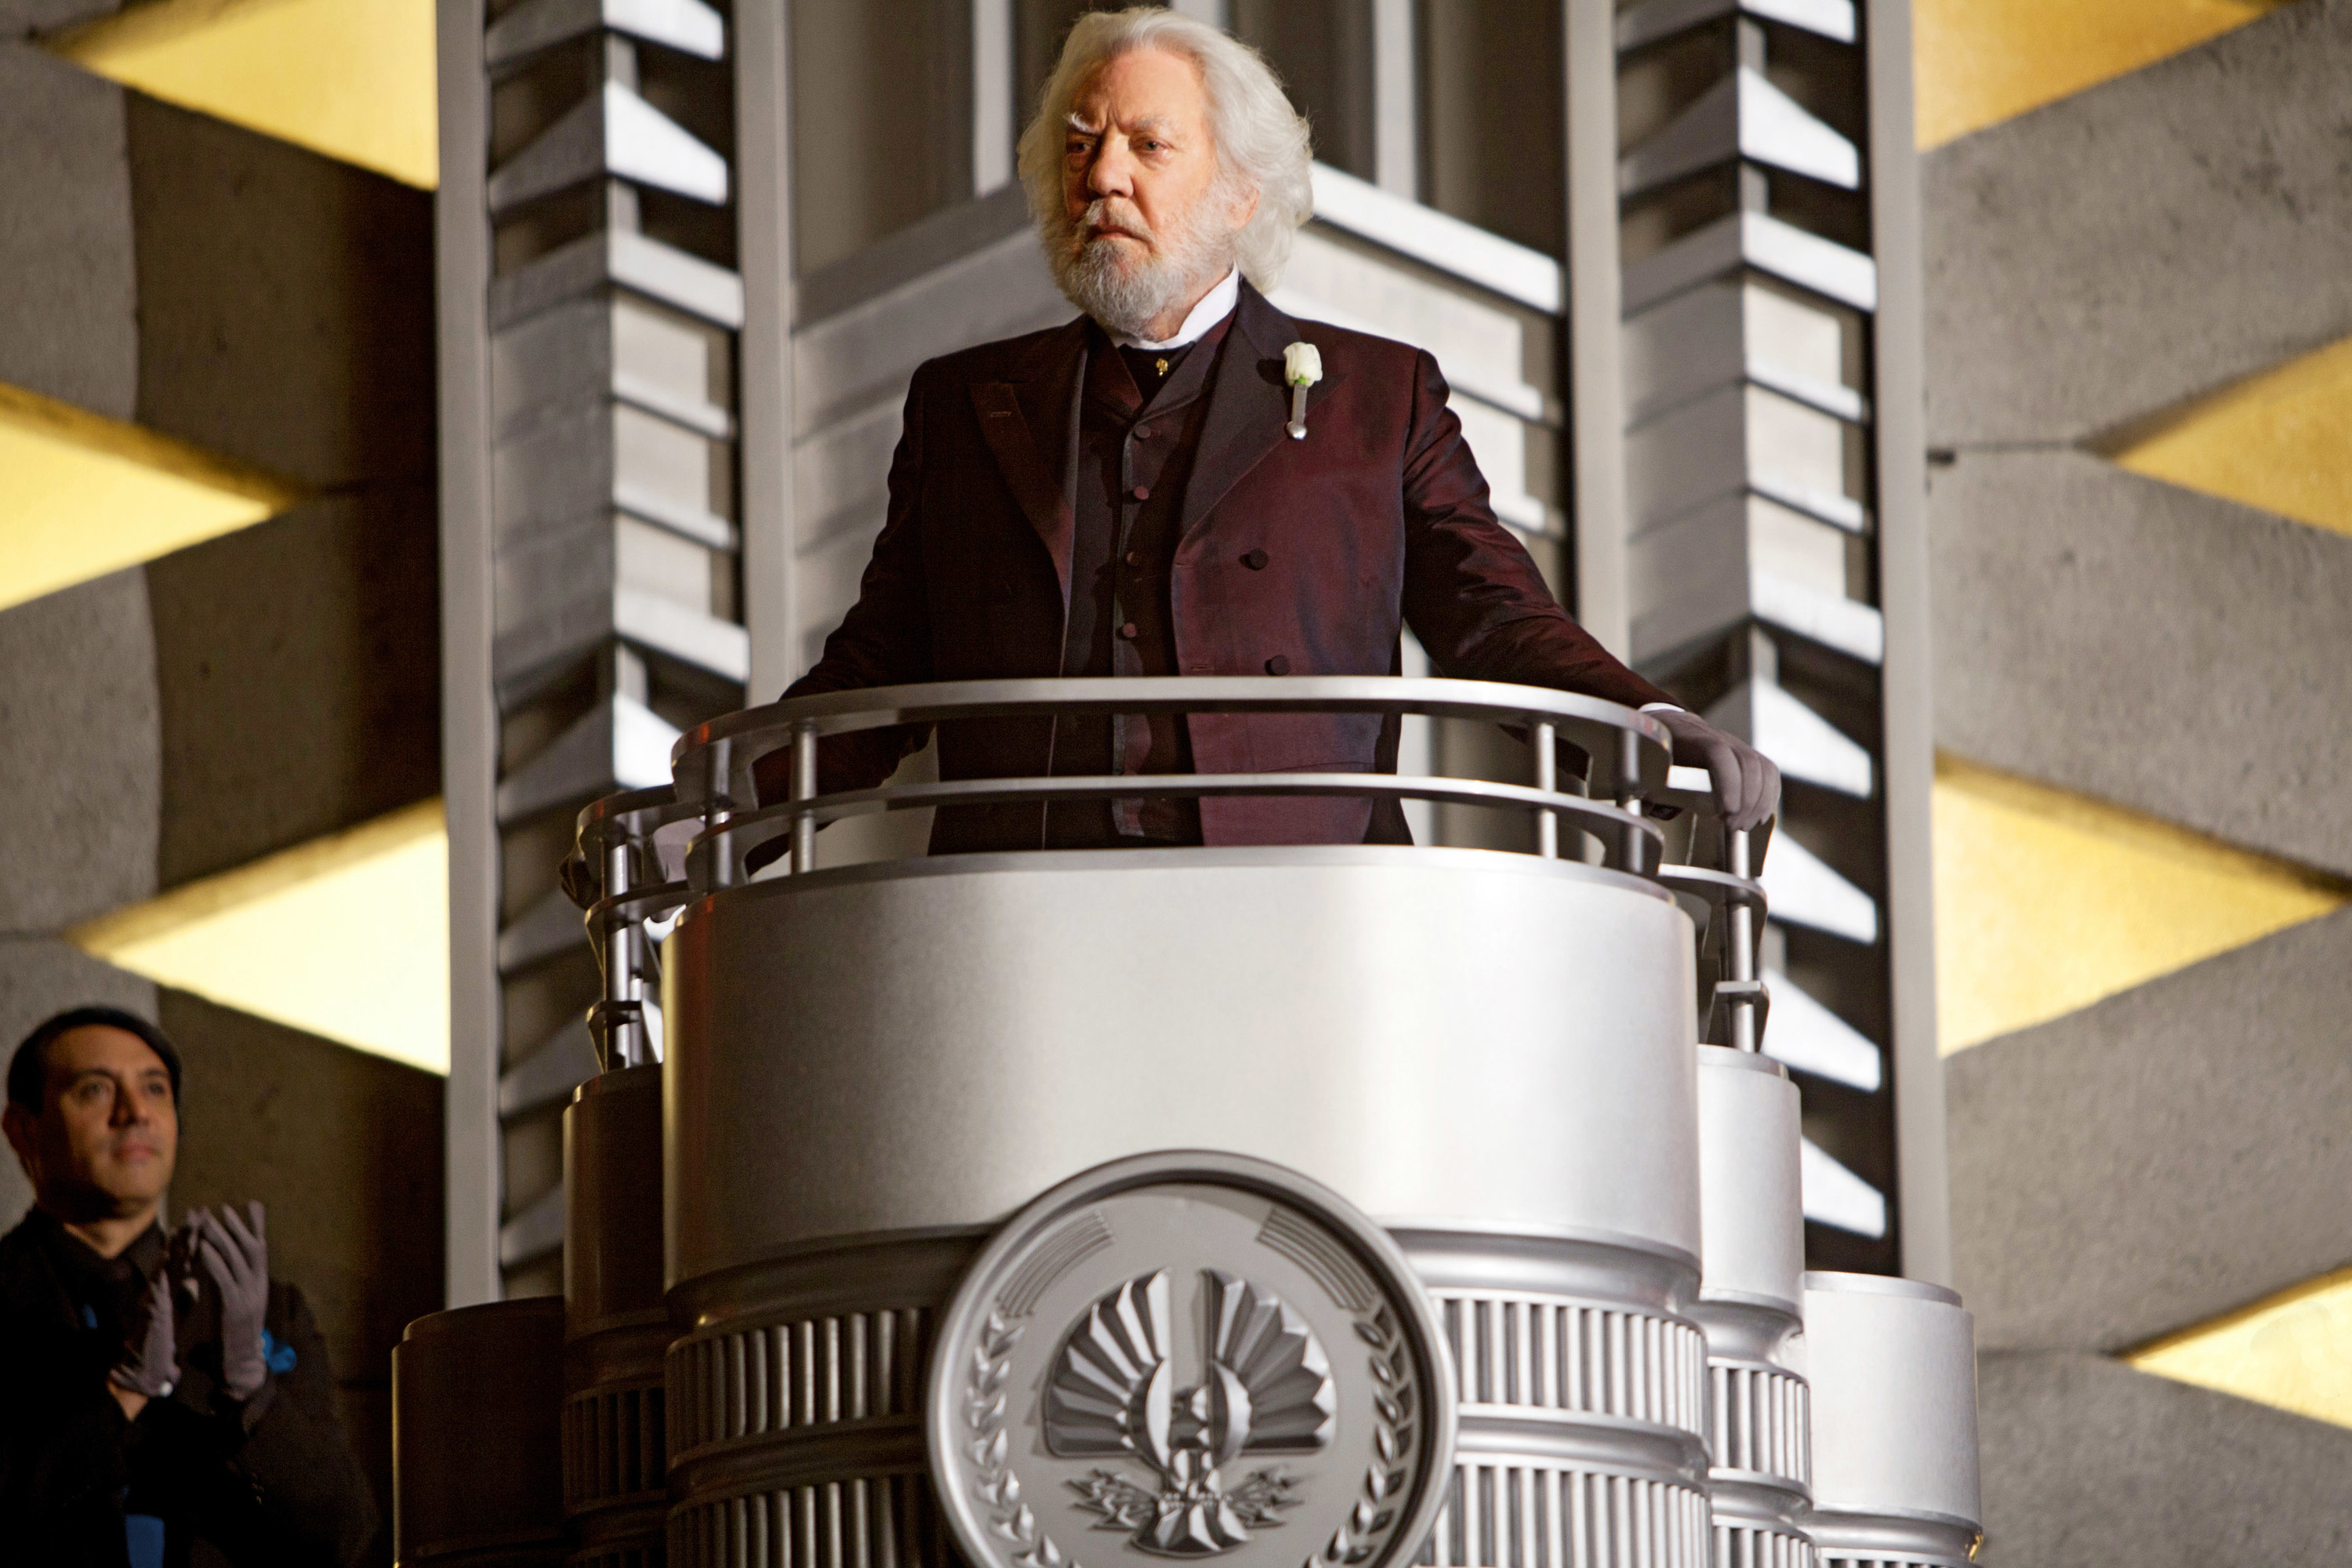 President Snow in a mottled red and black suit with a white rose pinned to his lapel